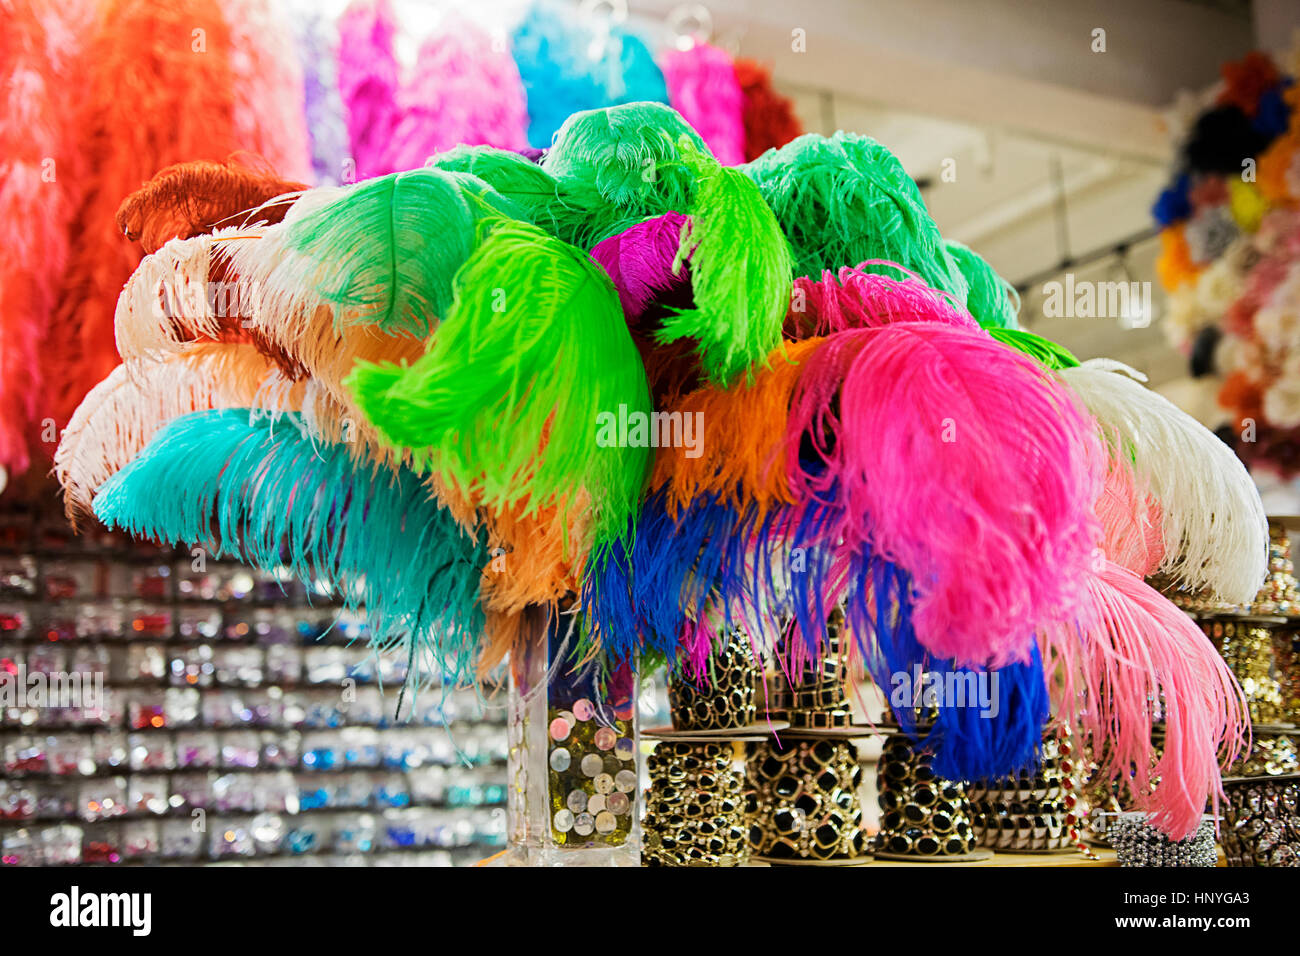 The interior of B & Q trimmings, a store specializing in burlesque costume supplies, in the Garment District in Manhattan, New York City. Stock Photo